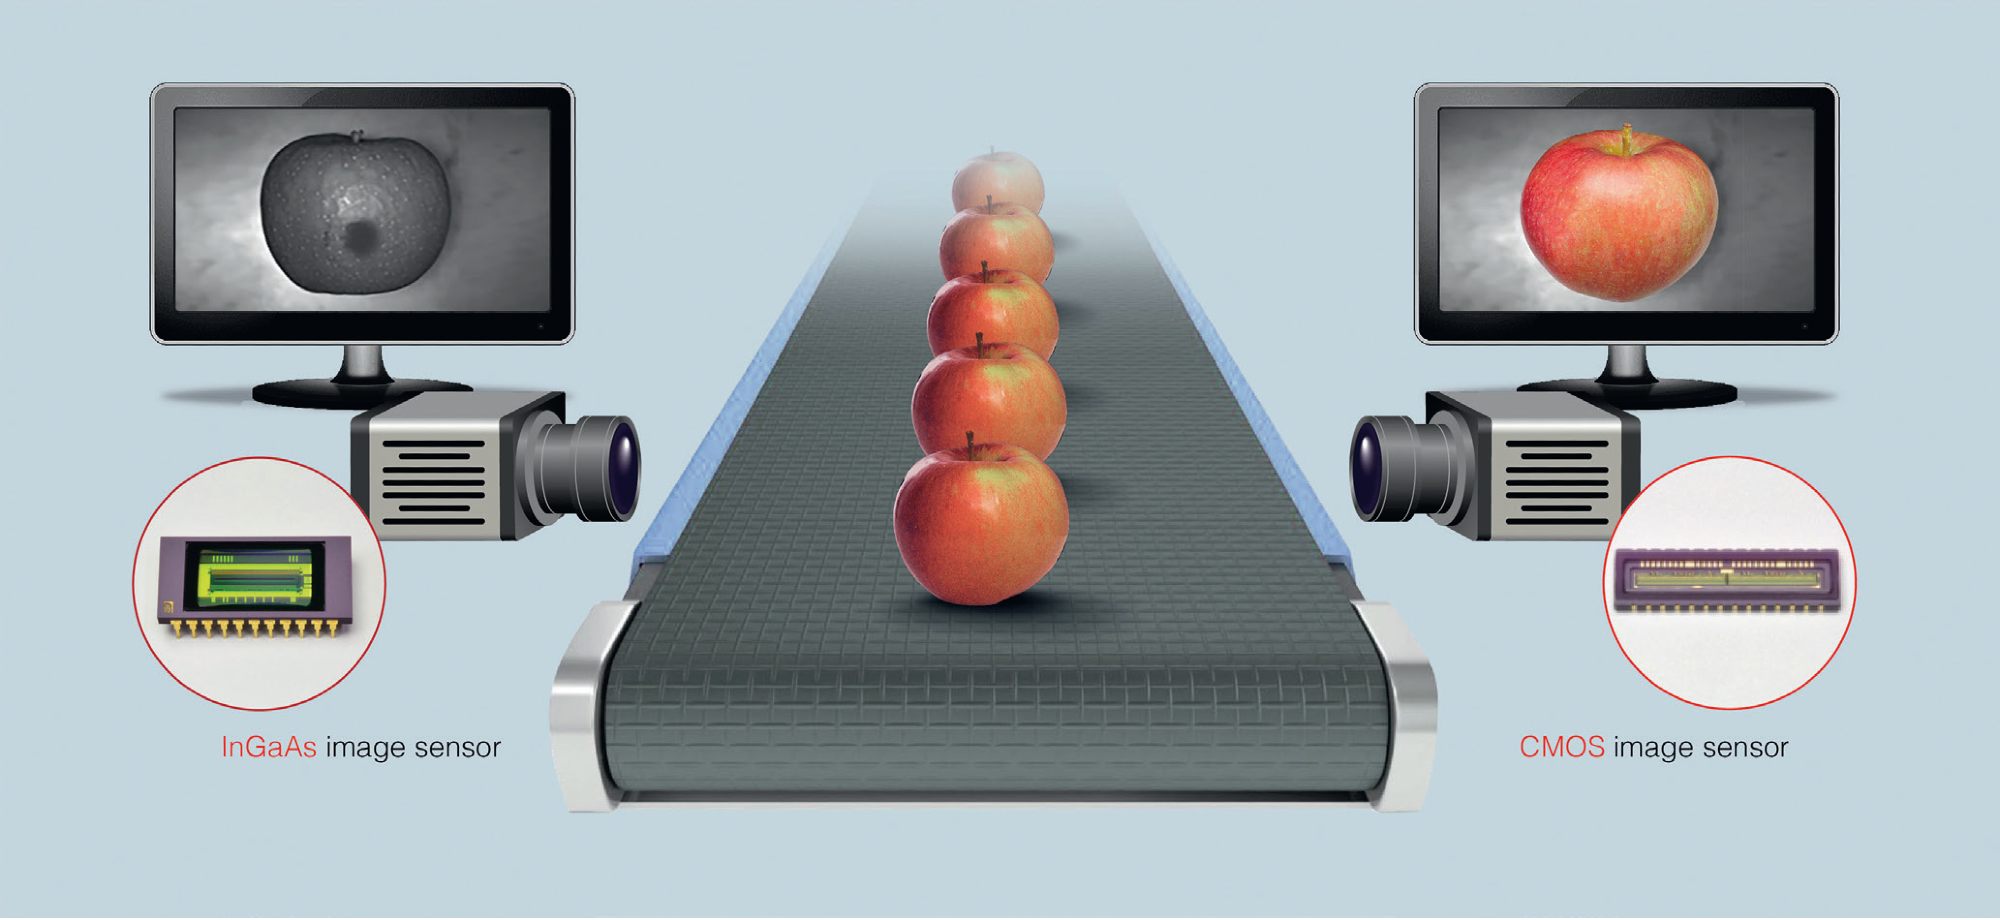 As apples travel down the conveyor belt, they are scanned using InGaAs and CMOS cameras. The InGaAs camera will show defects beginning to form under the skin that a human eye cannot see; the CMOS camera will show visible defects.